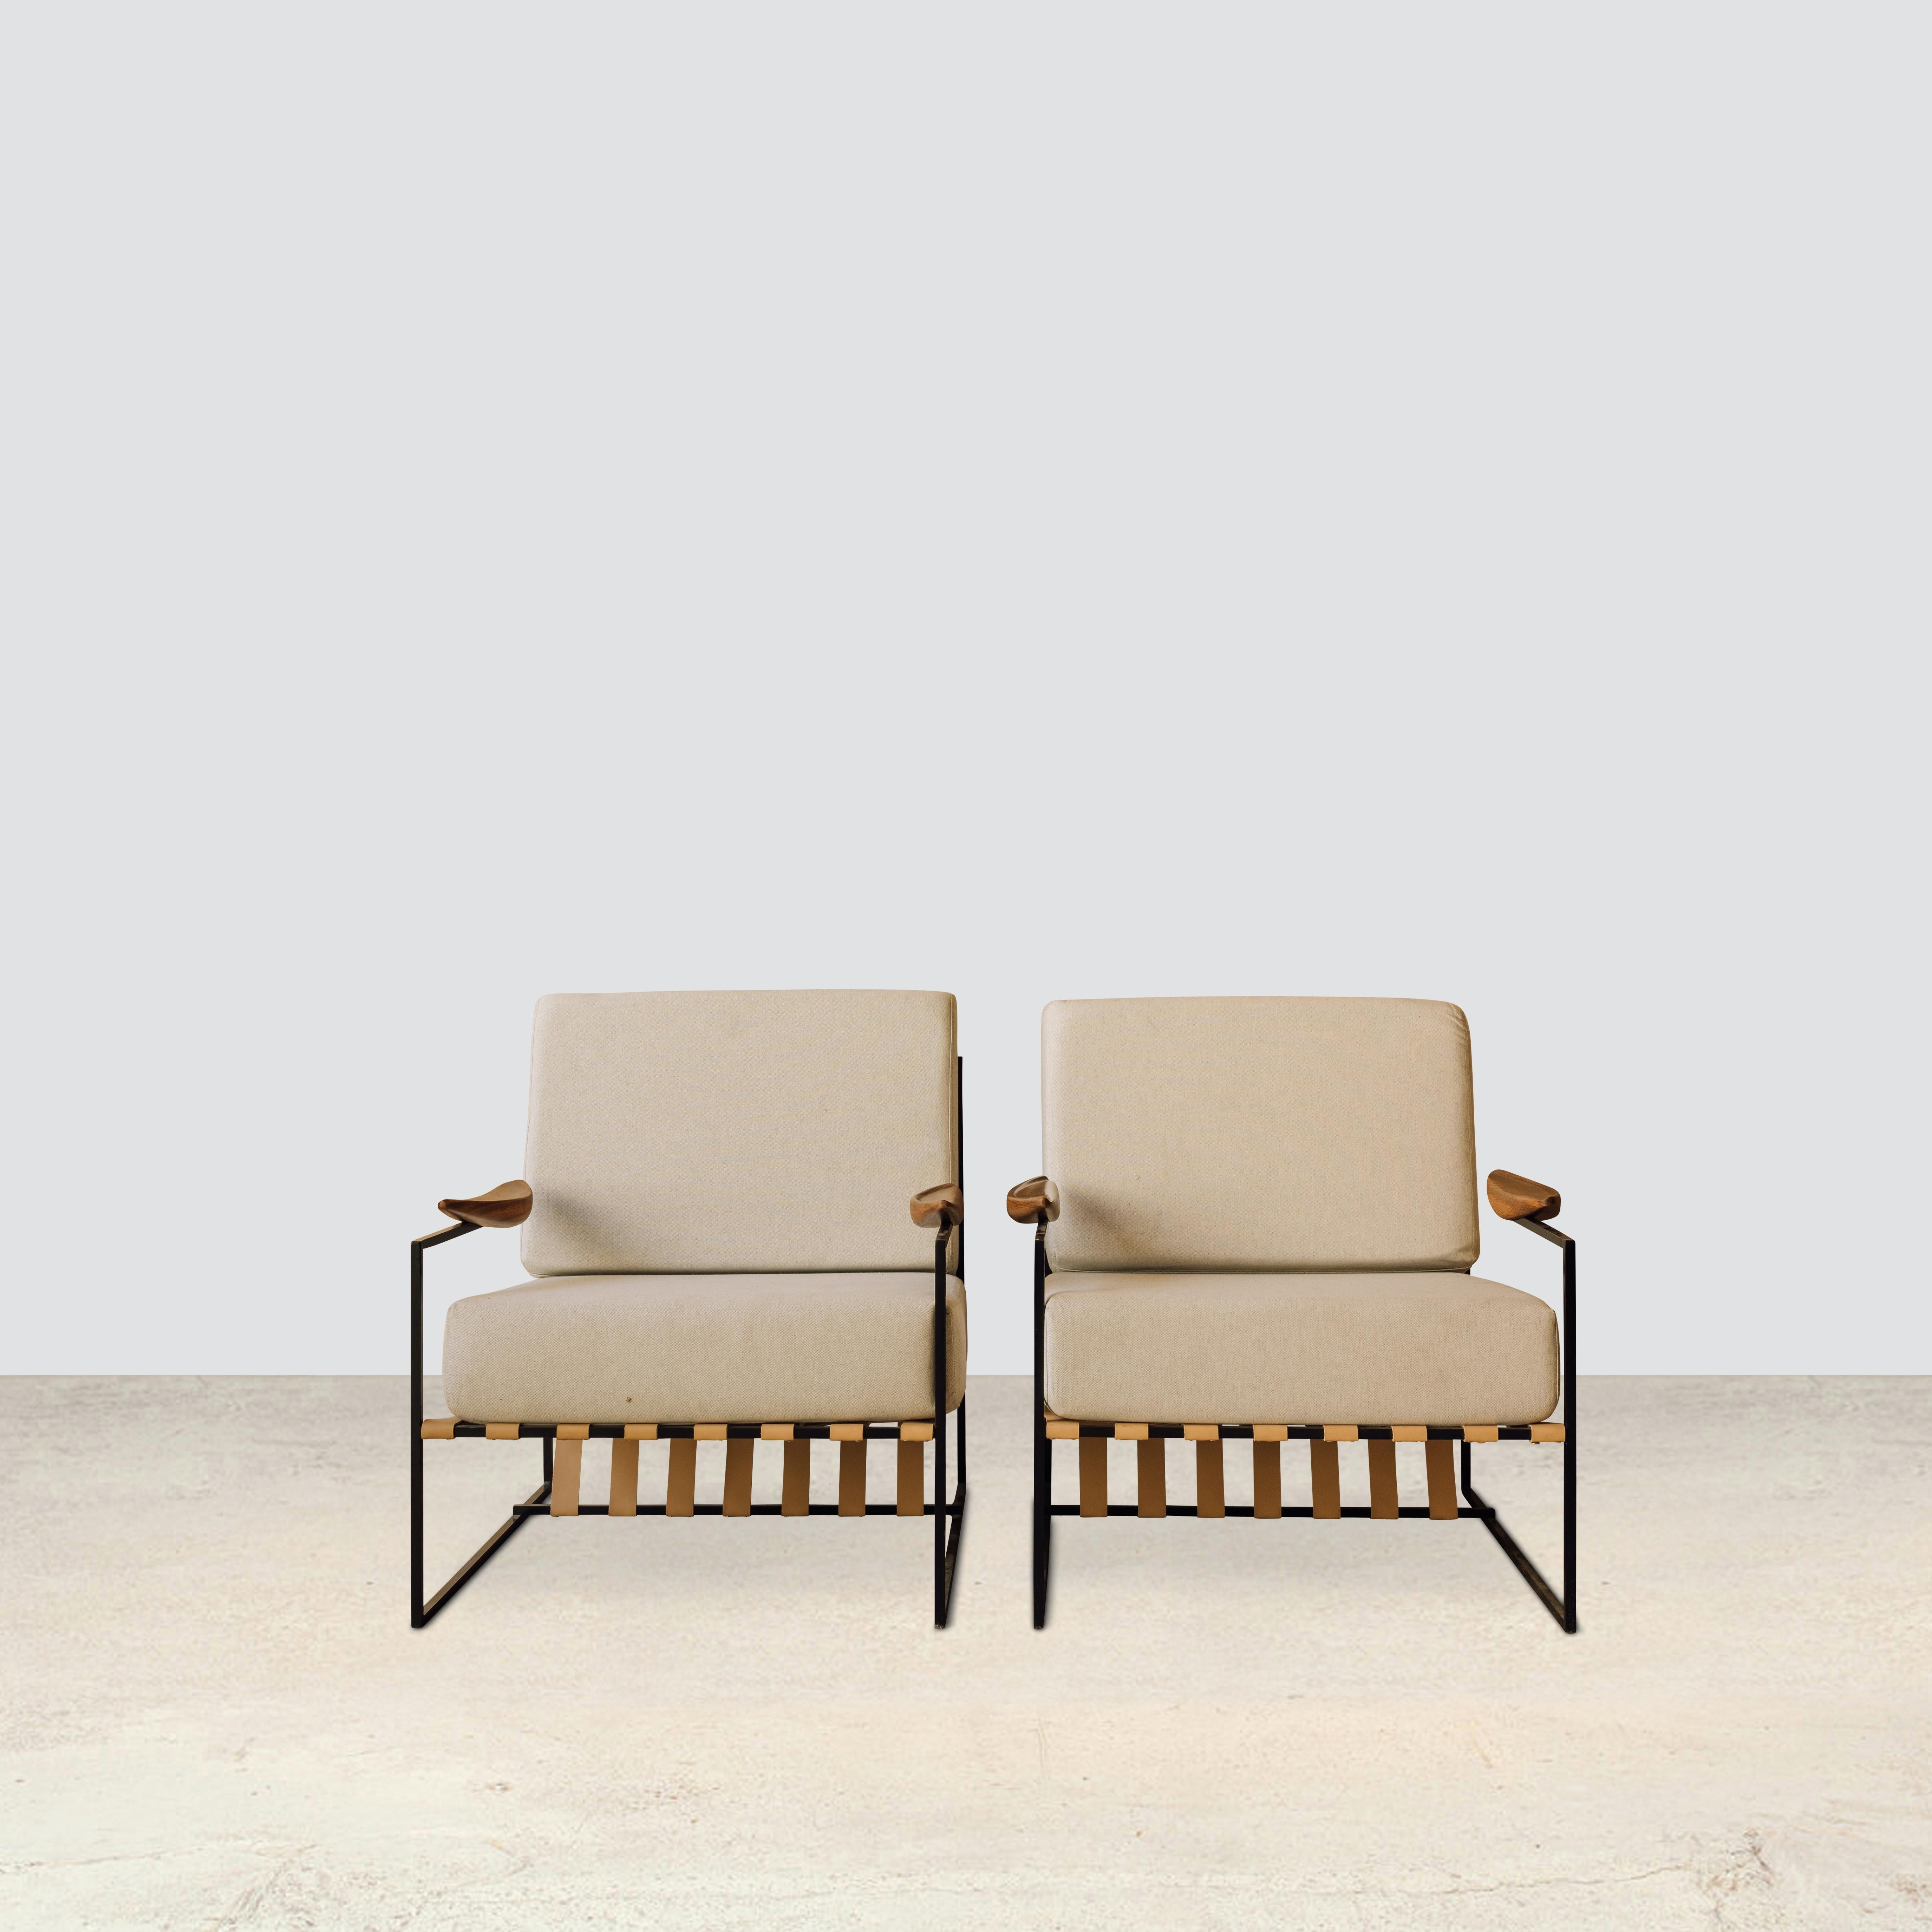 Anette armchair
By Jorge Zalszupin 1960

Originally designed in the 1960s, this armchair is named after Jorge Zalszupin's wife, Annette. Only a few prototypes were made at the time until finally being re-edited in 2014.

Provenance
Brasilian